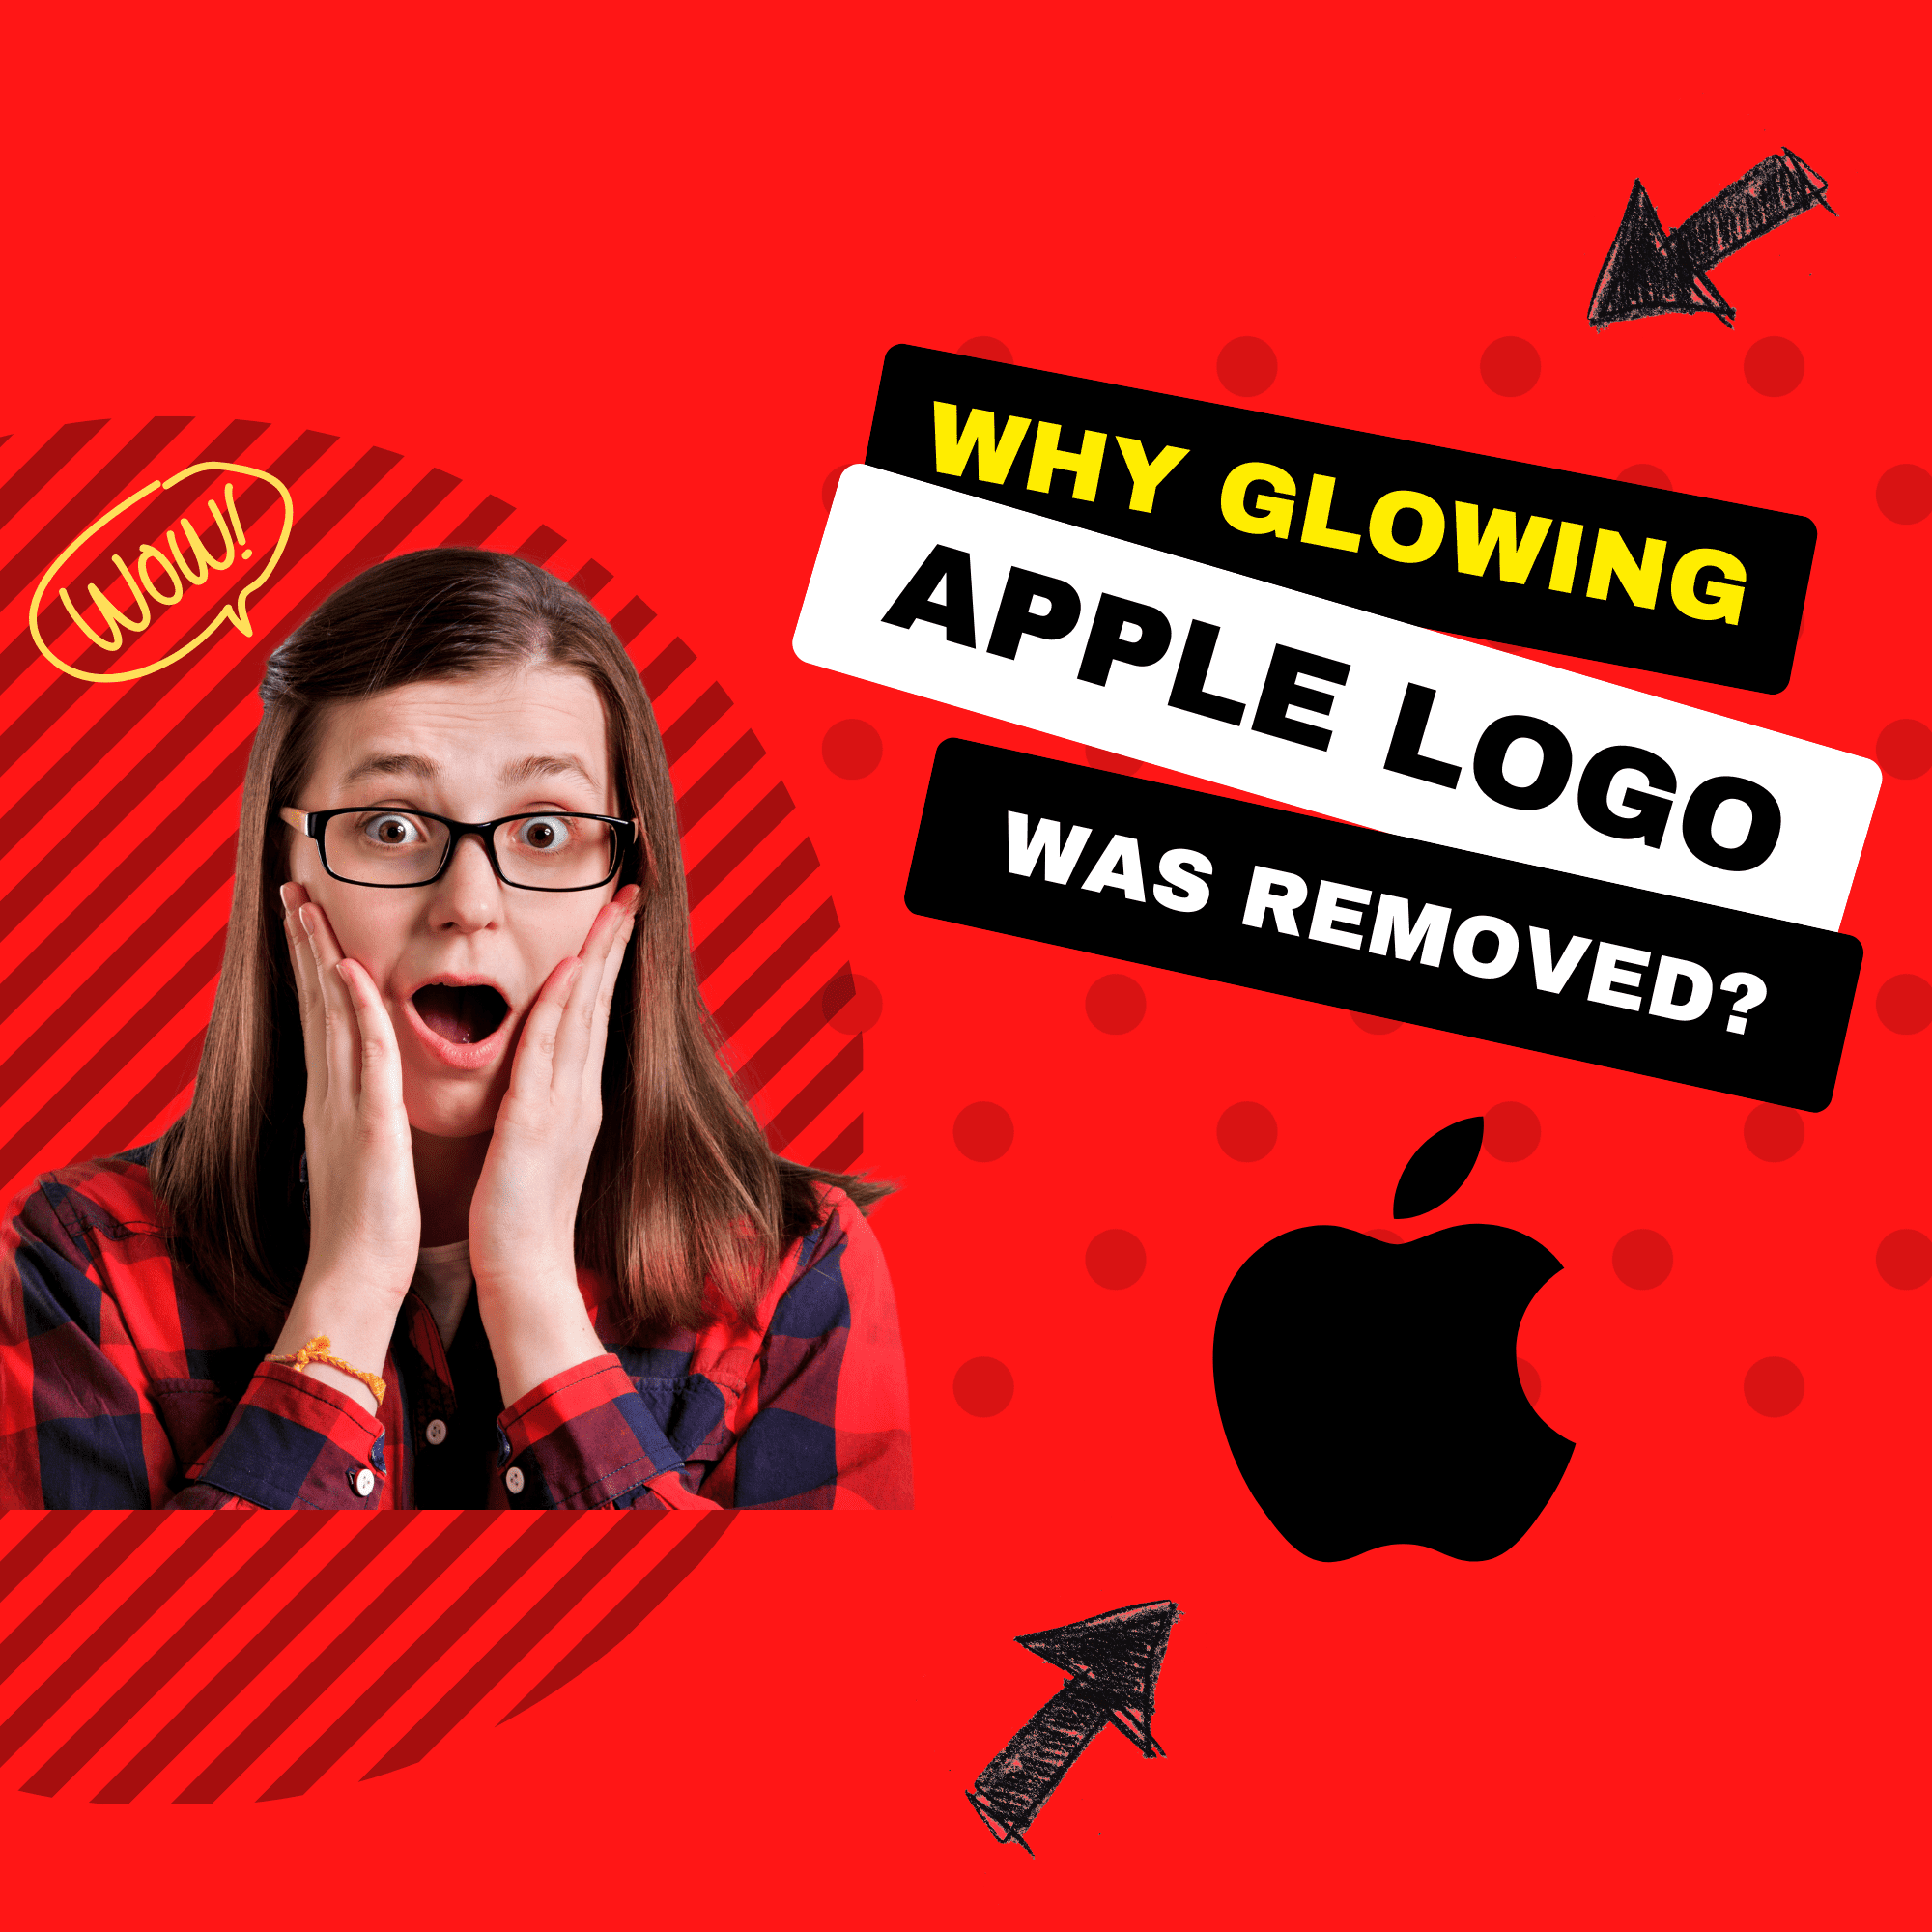 why apple glowing logo was removed - explained